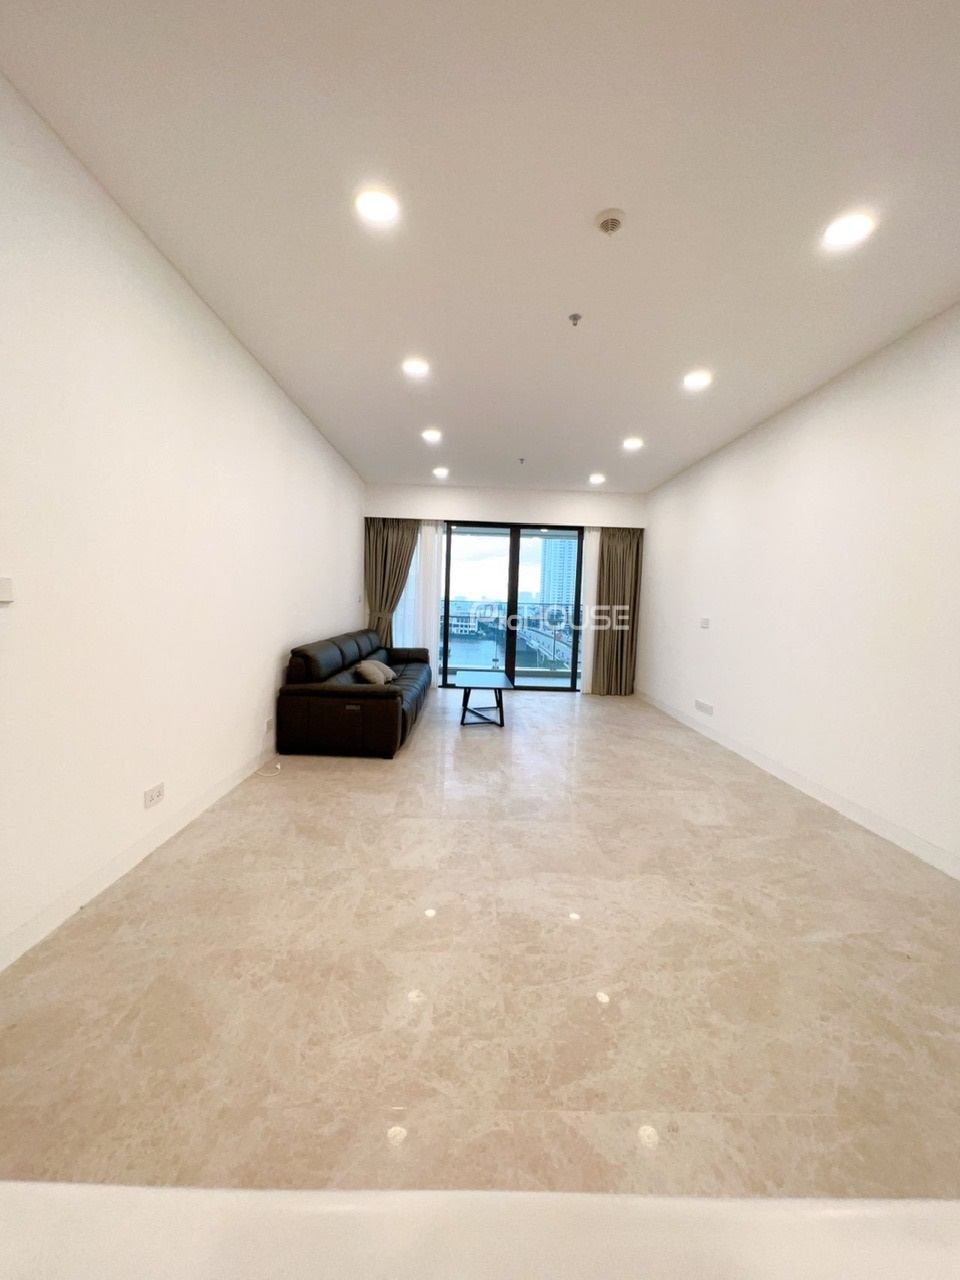 Large 4-bedroom apartment for rent in The River Thu Thiem with basic furniture